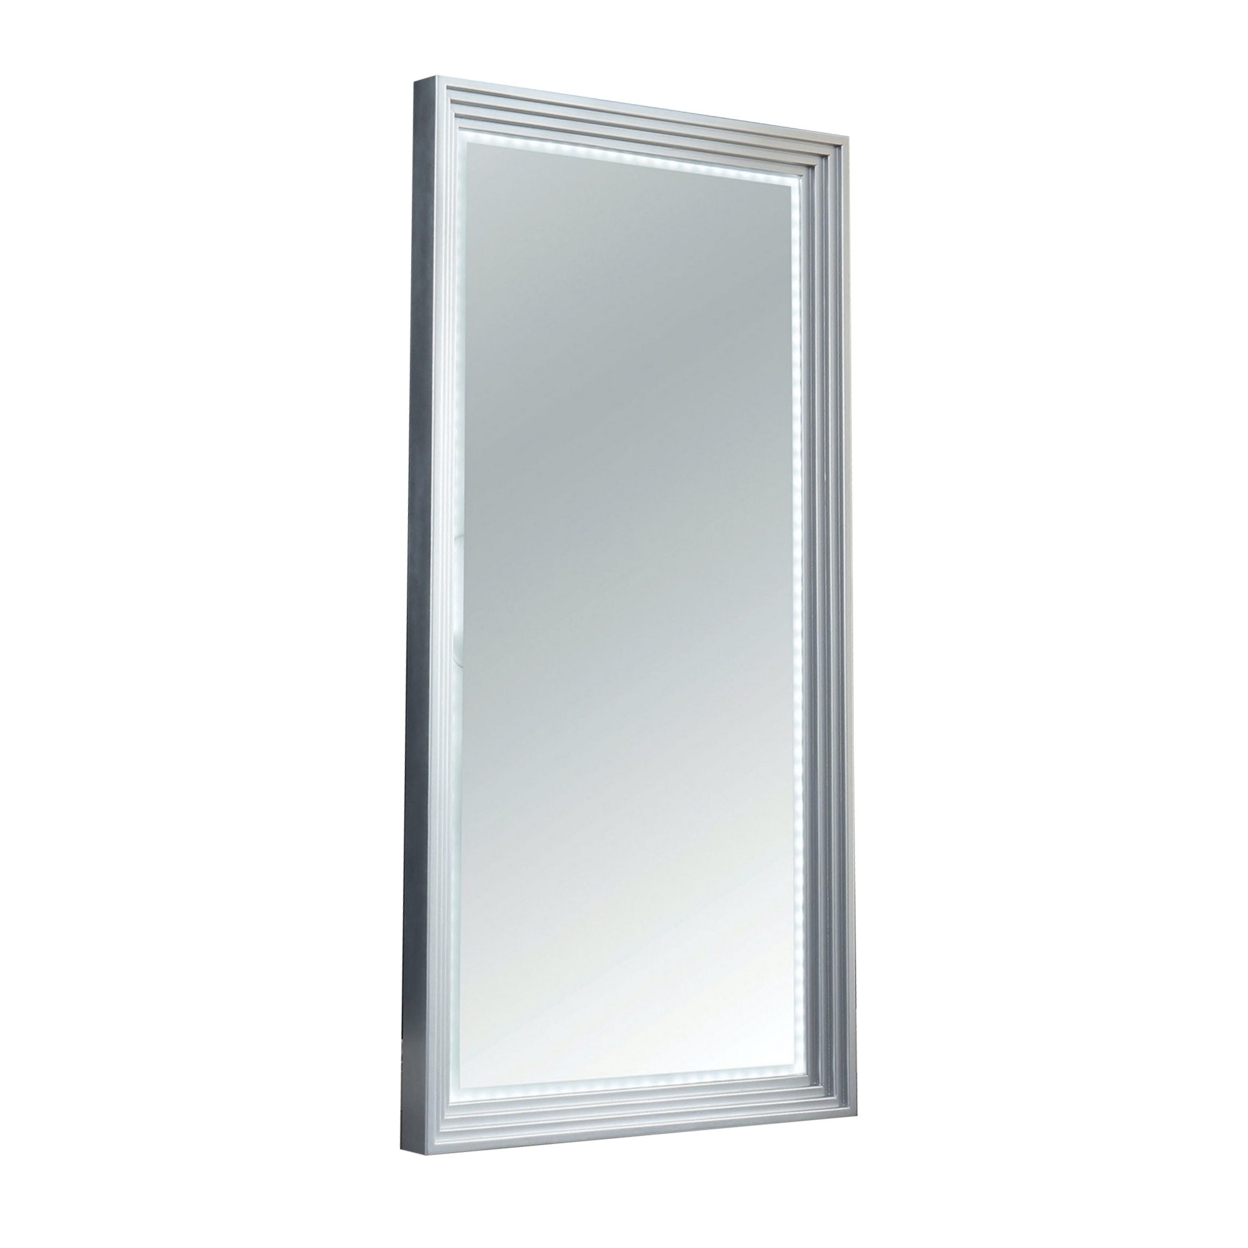 Hallway Mirror With LED Light Trim And Grooved Edges, Silver- Saltoro Sherpi